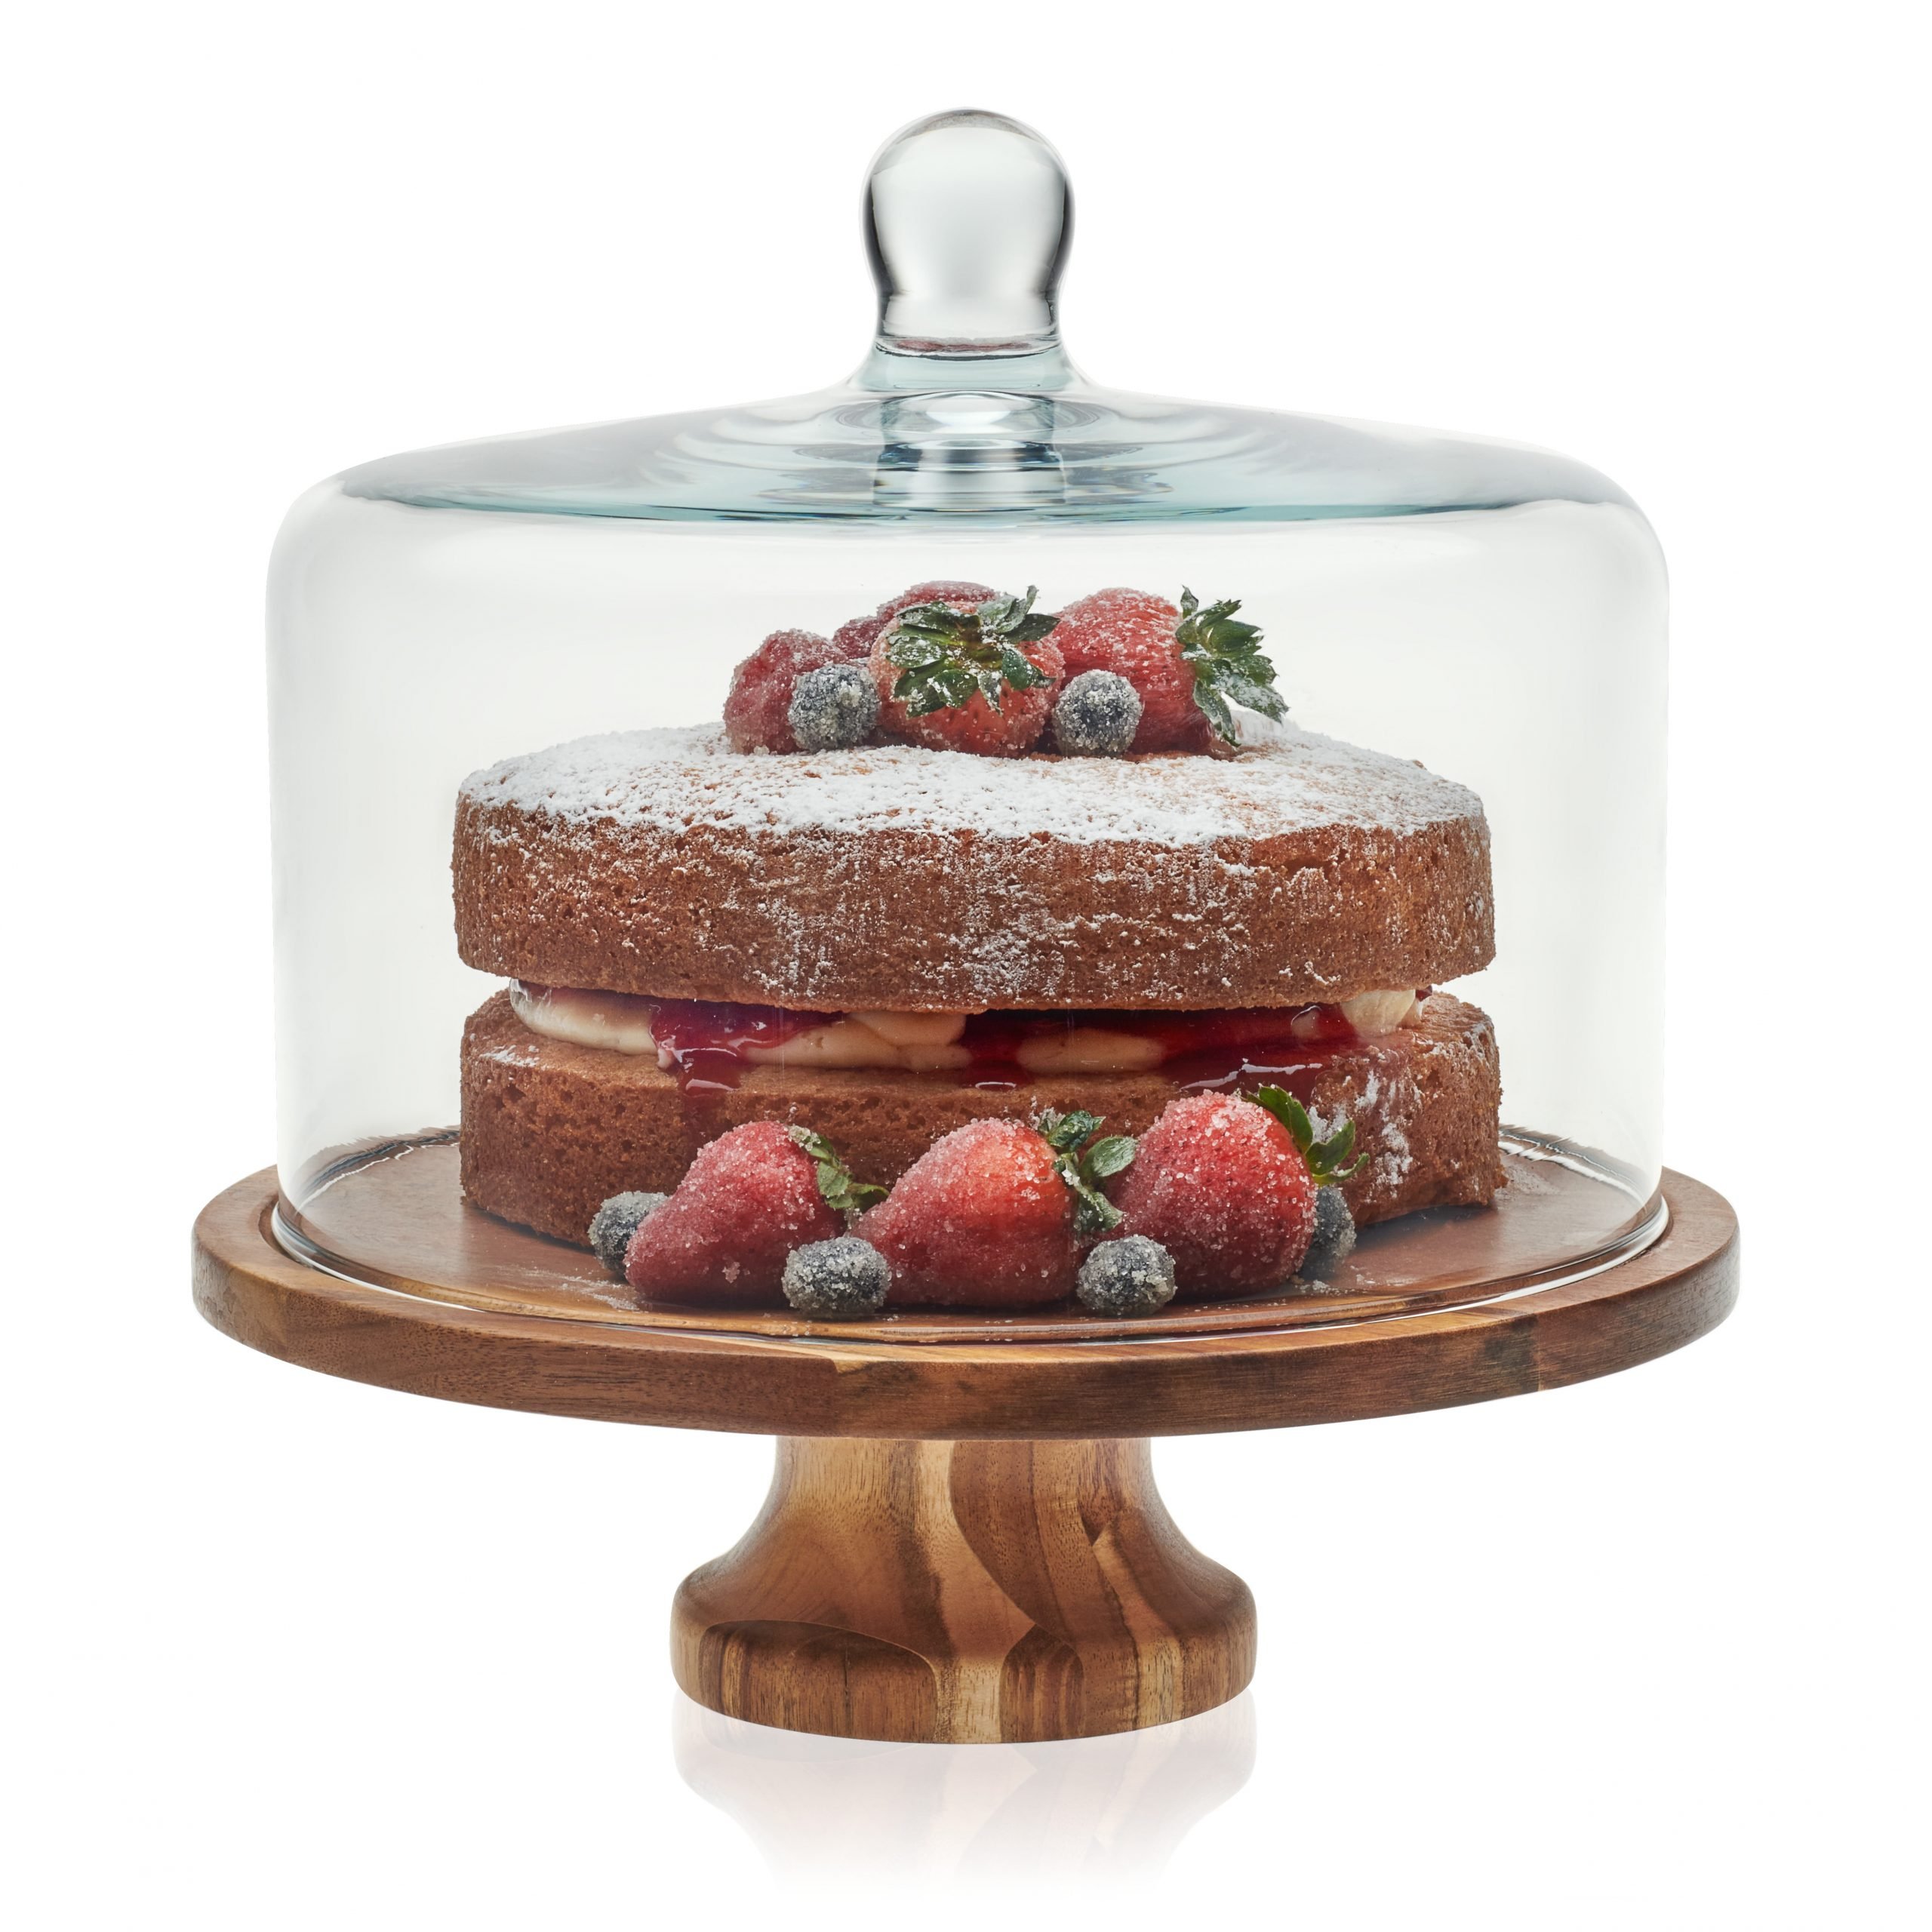 Libbey Acaciawood Footed Round Wood Server Cake Stand with Glass Dome ...